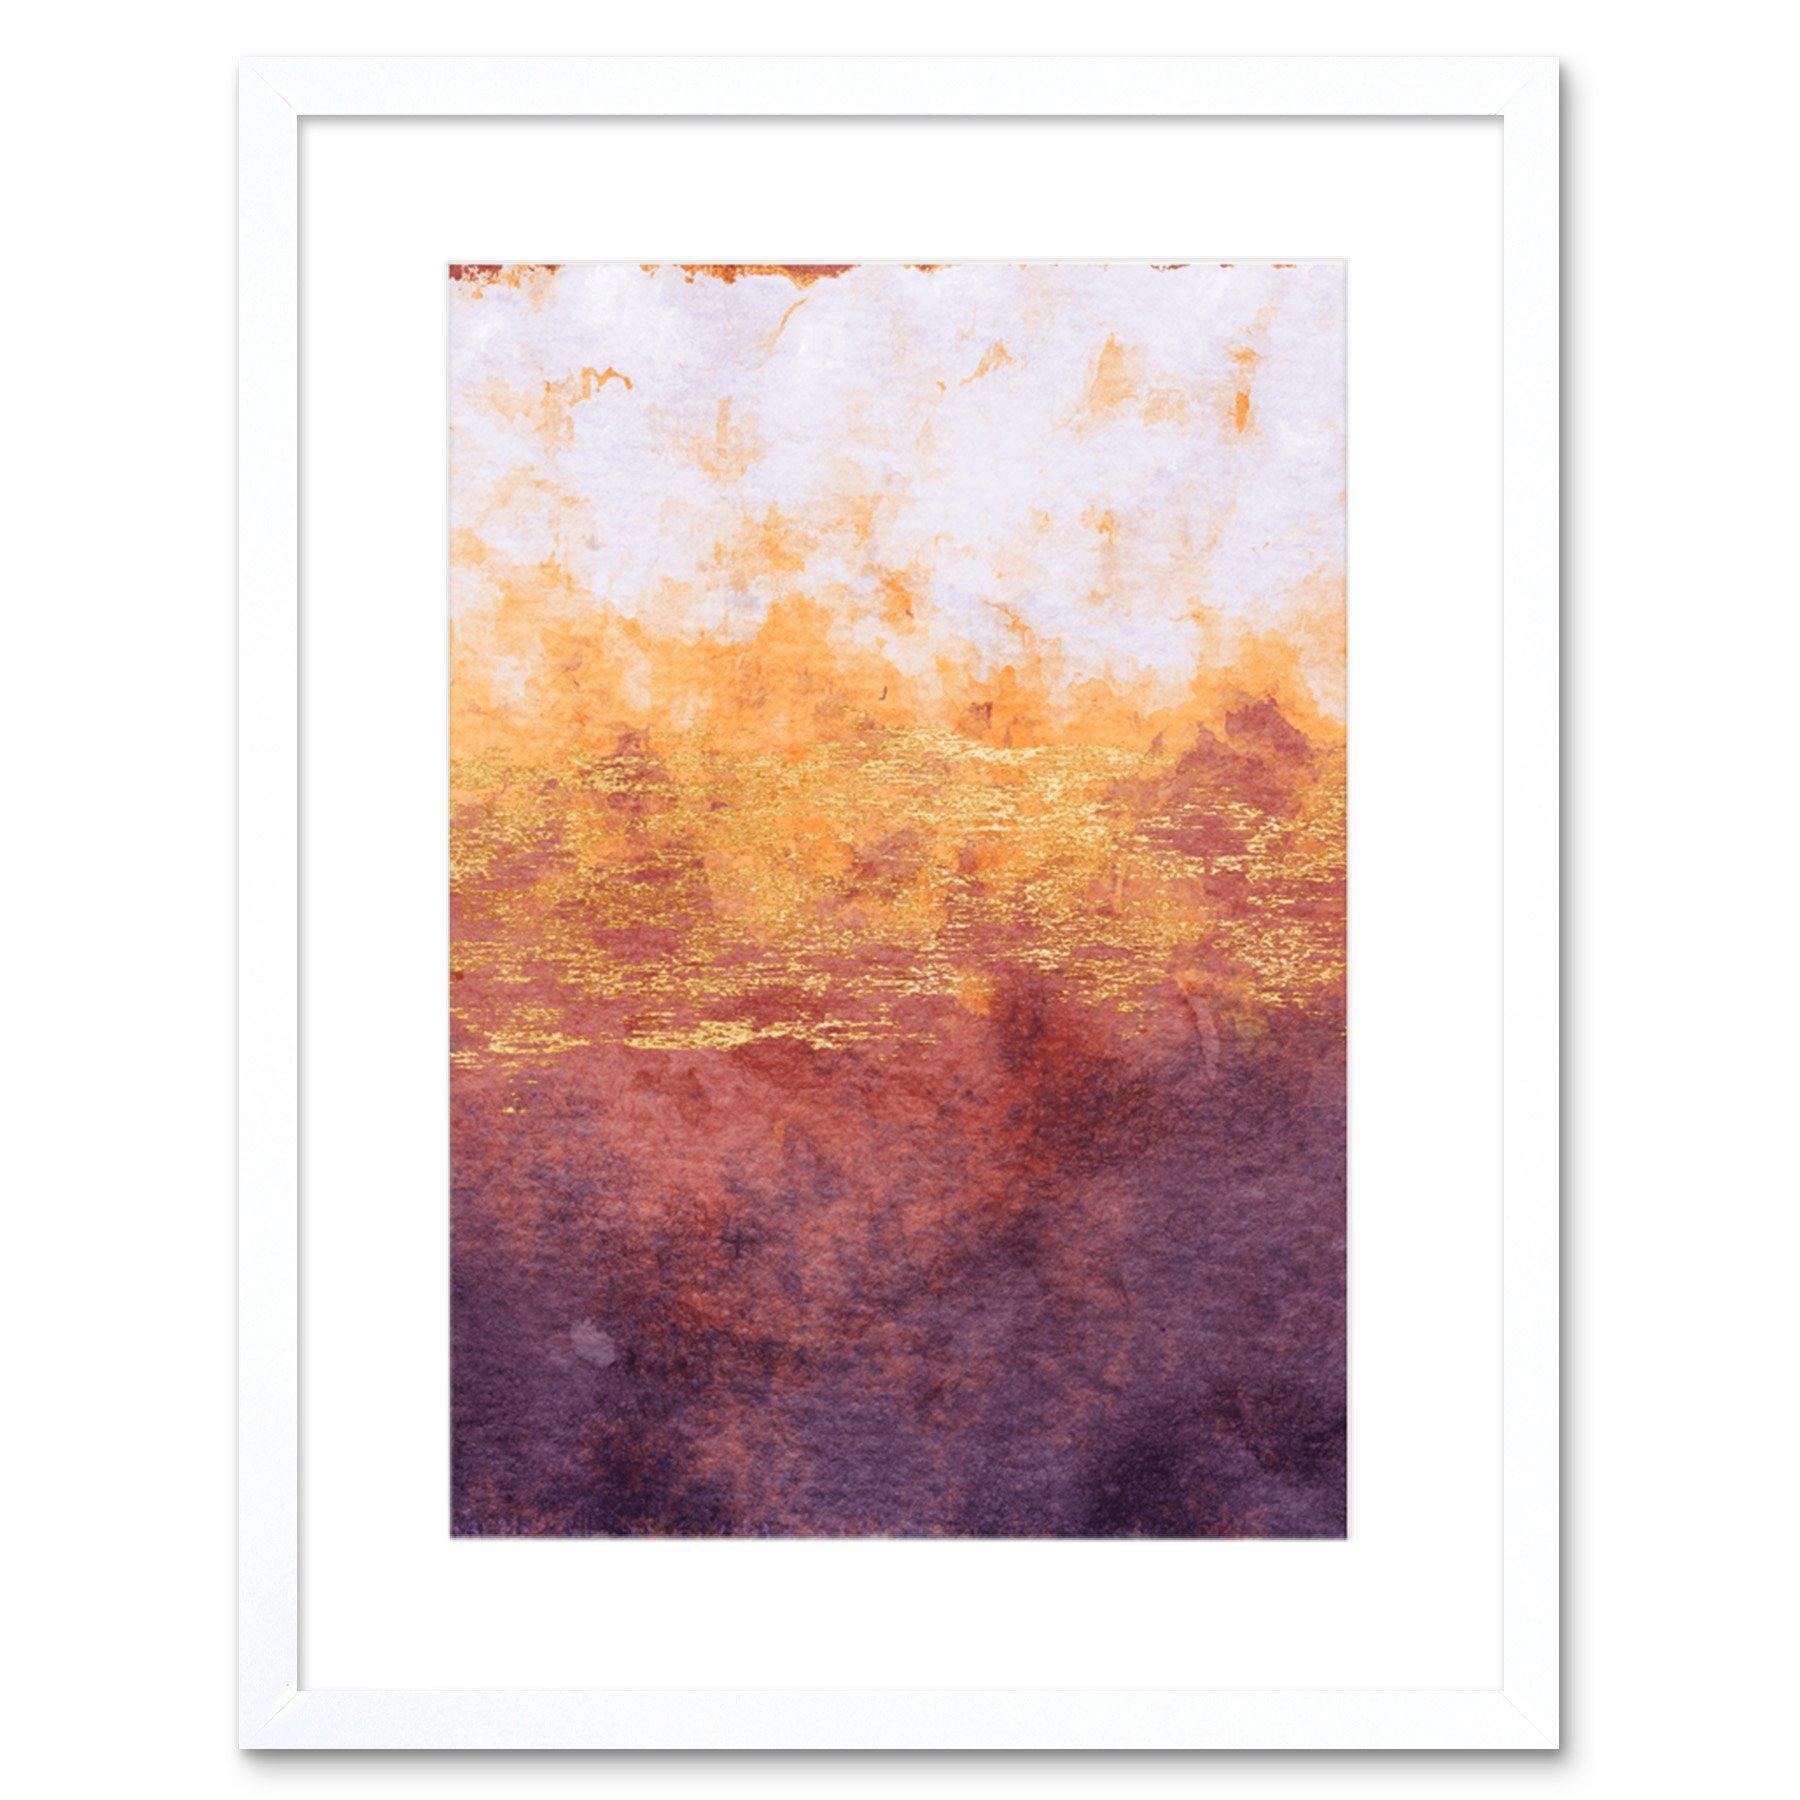 Abstract Purple Yellow Gold Watercolour Art Print Framed Poster Wall Decor 9x7 inch - image 1